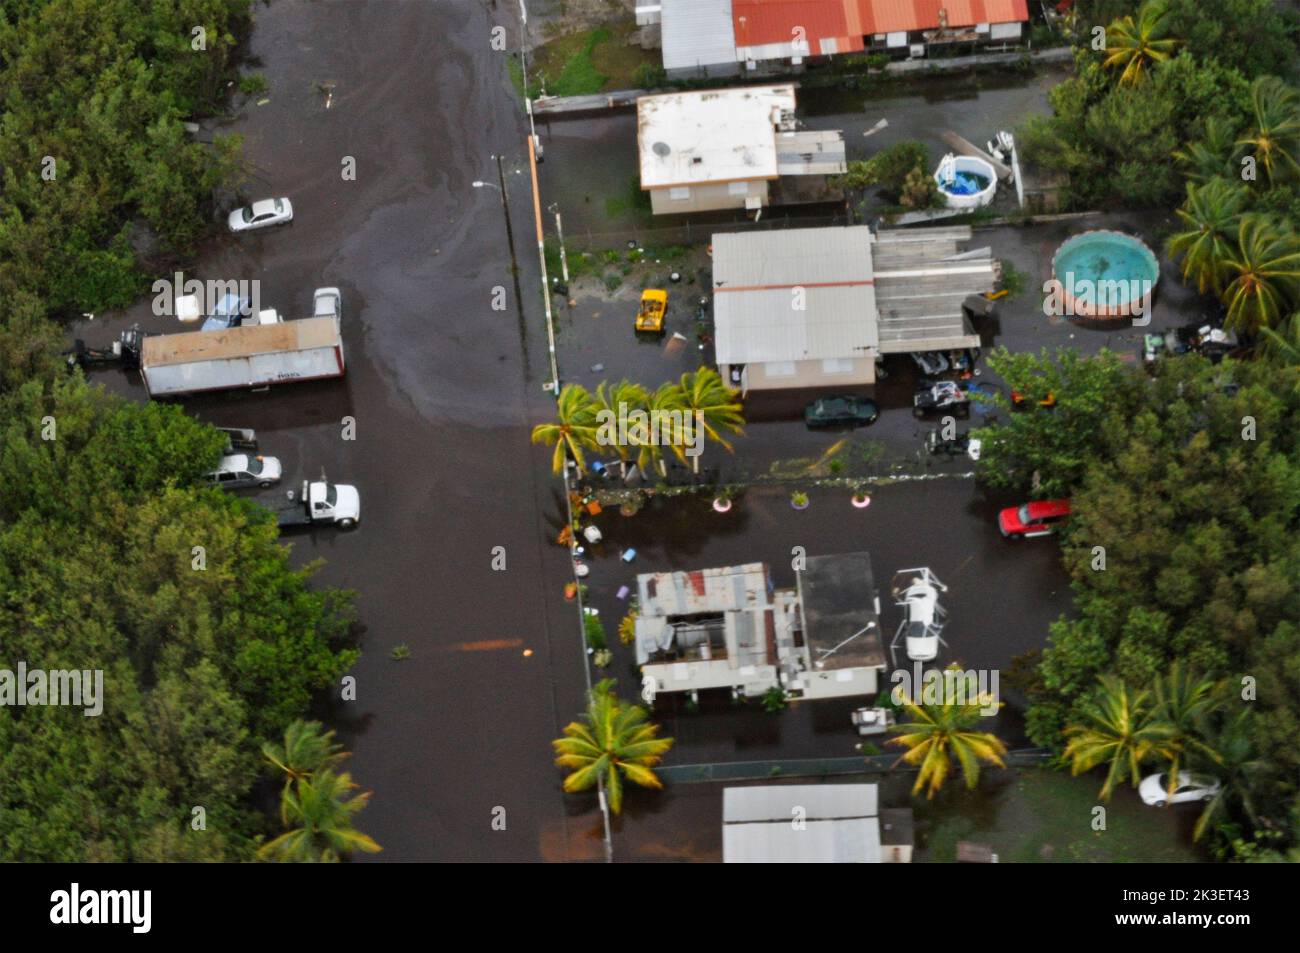 Salinas, United States. 19 September, 2022. A U.S. Coast Guard aircrew conduct an overflight of the southern coast searching for survivors in the aftermath of Hurricane Fiona, September 19, 2022 near Salinas, Puerto Rico. Credit: CPO Stephen Lehmann/US Coast Guard/Alamy Live News Stock Photo